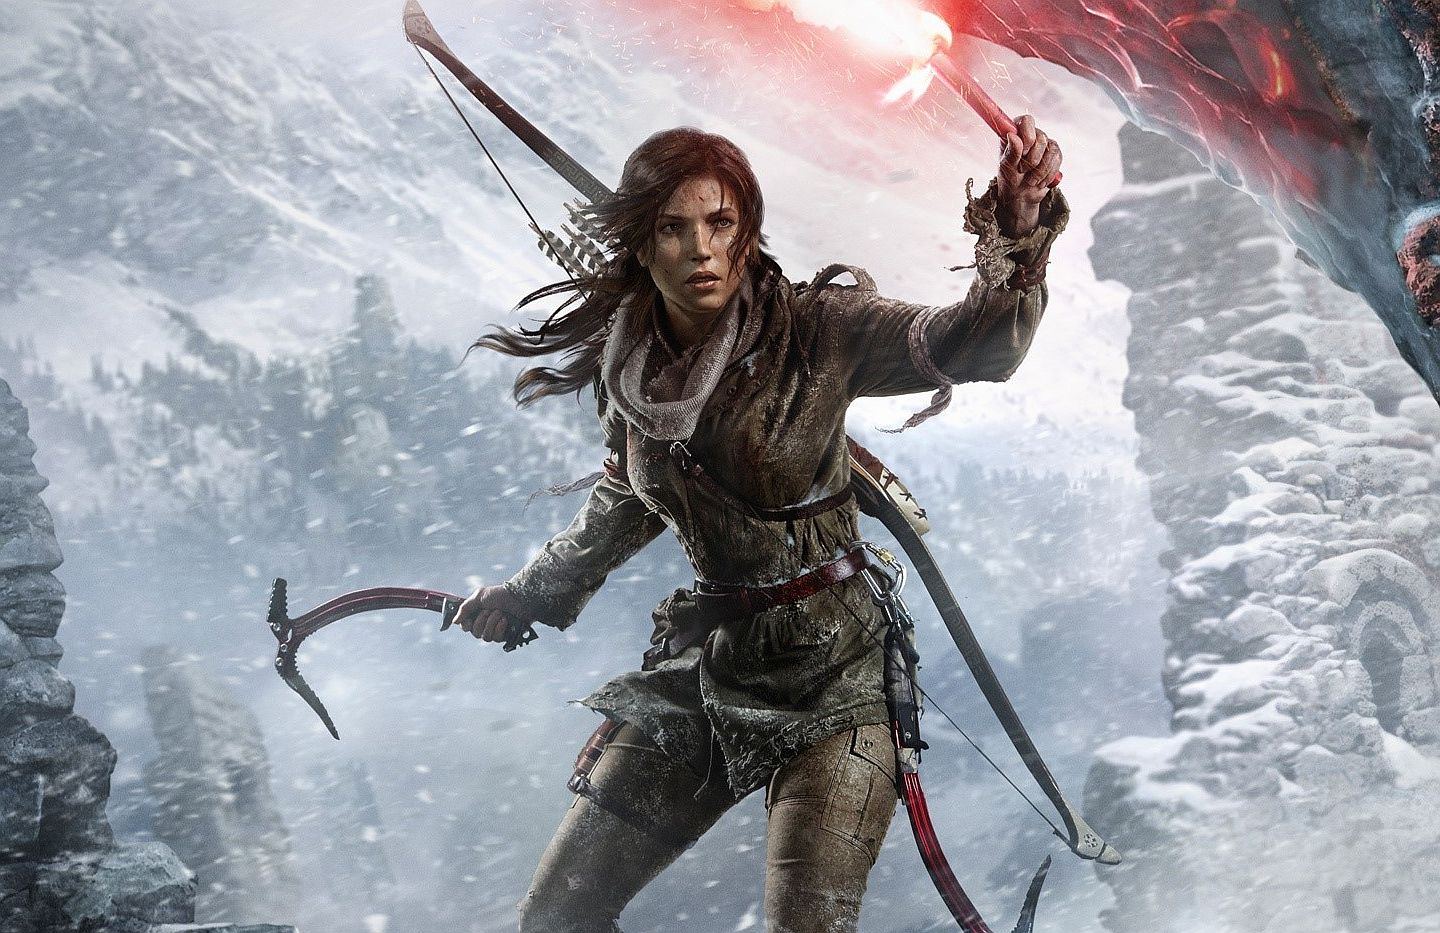 Image for Rise of the Tomb Raider will be free on PC for Prime members starting next week